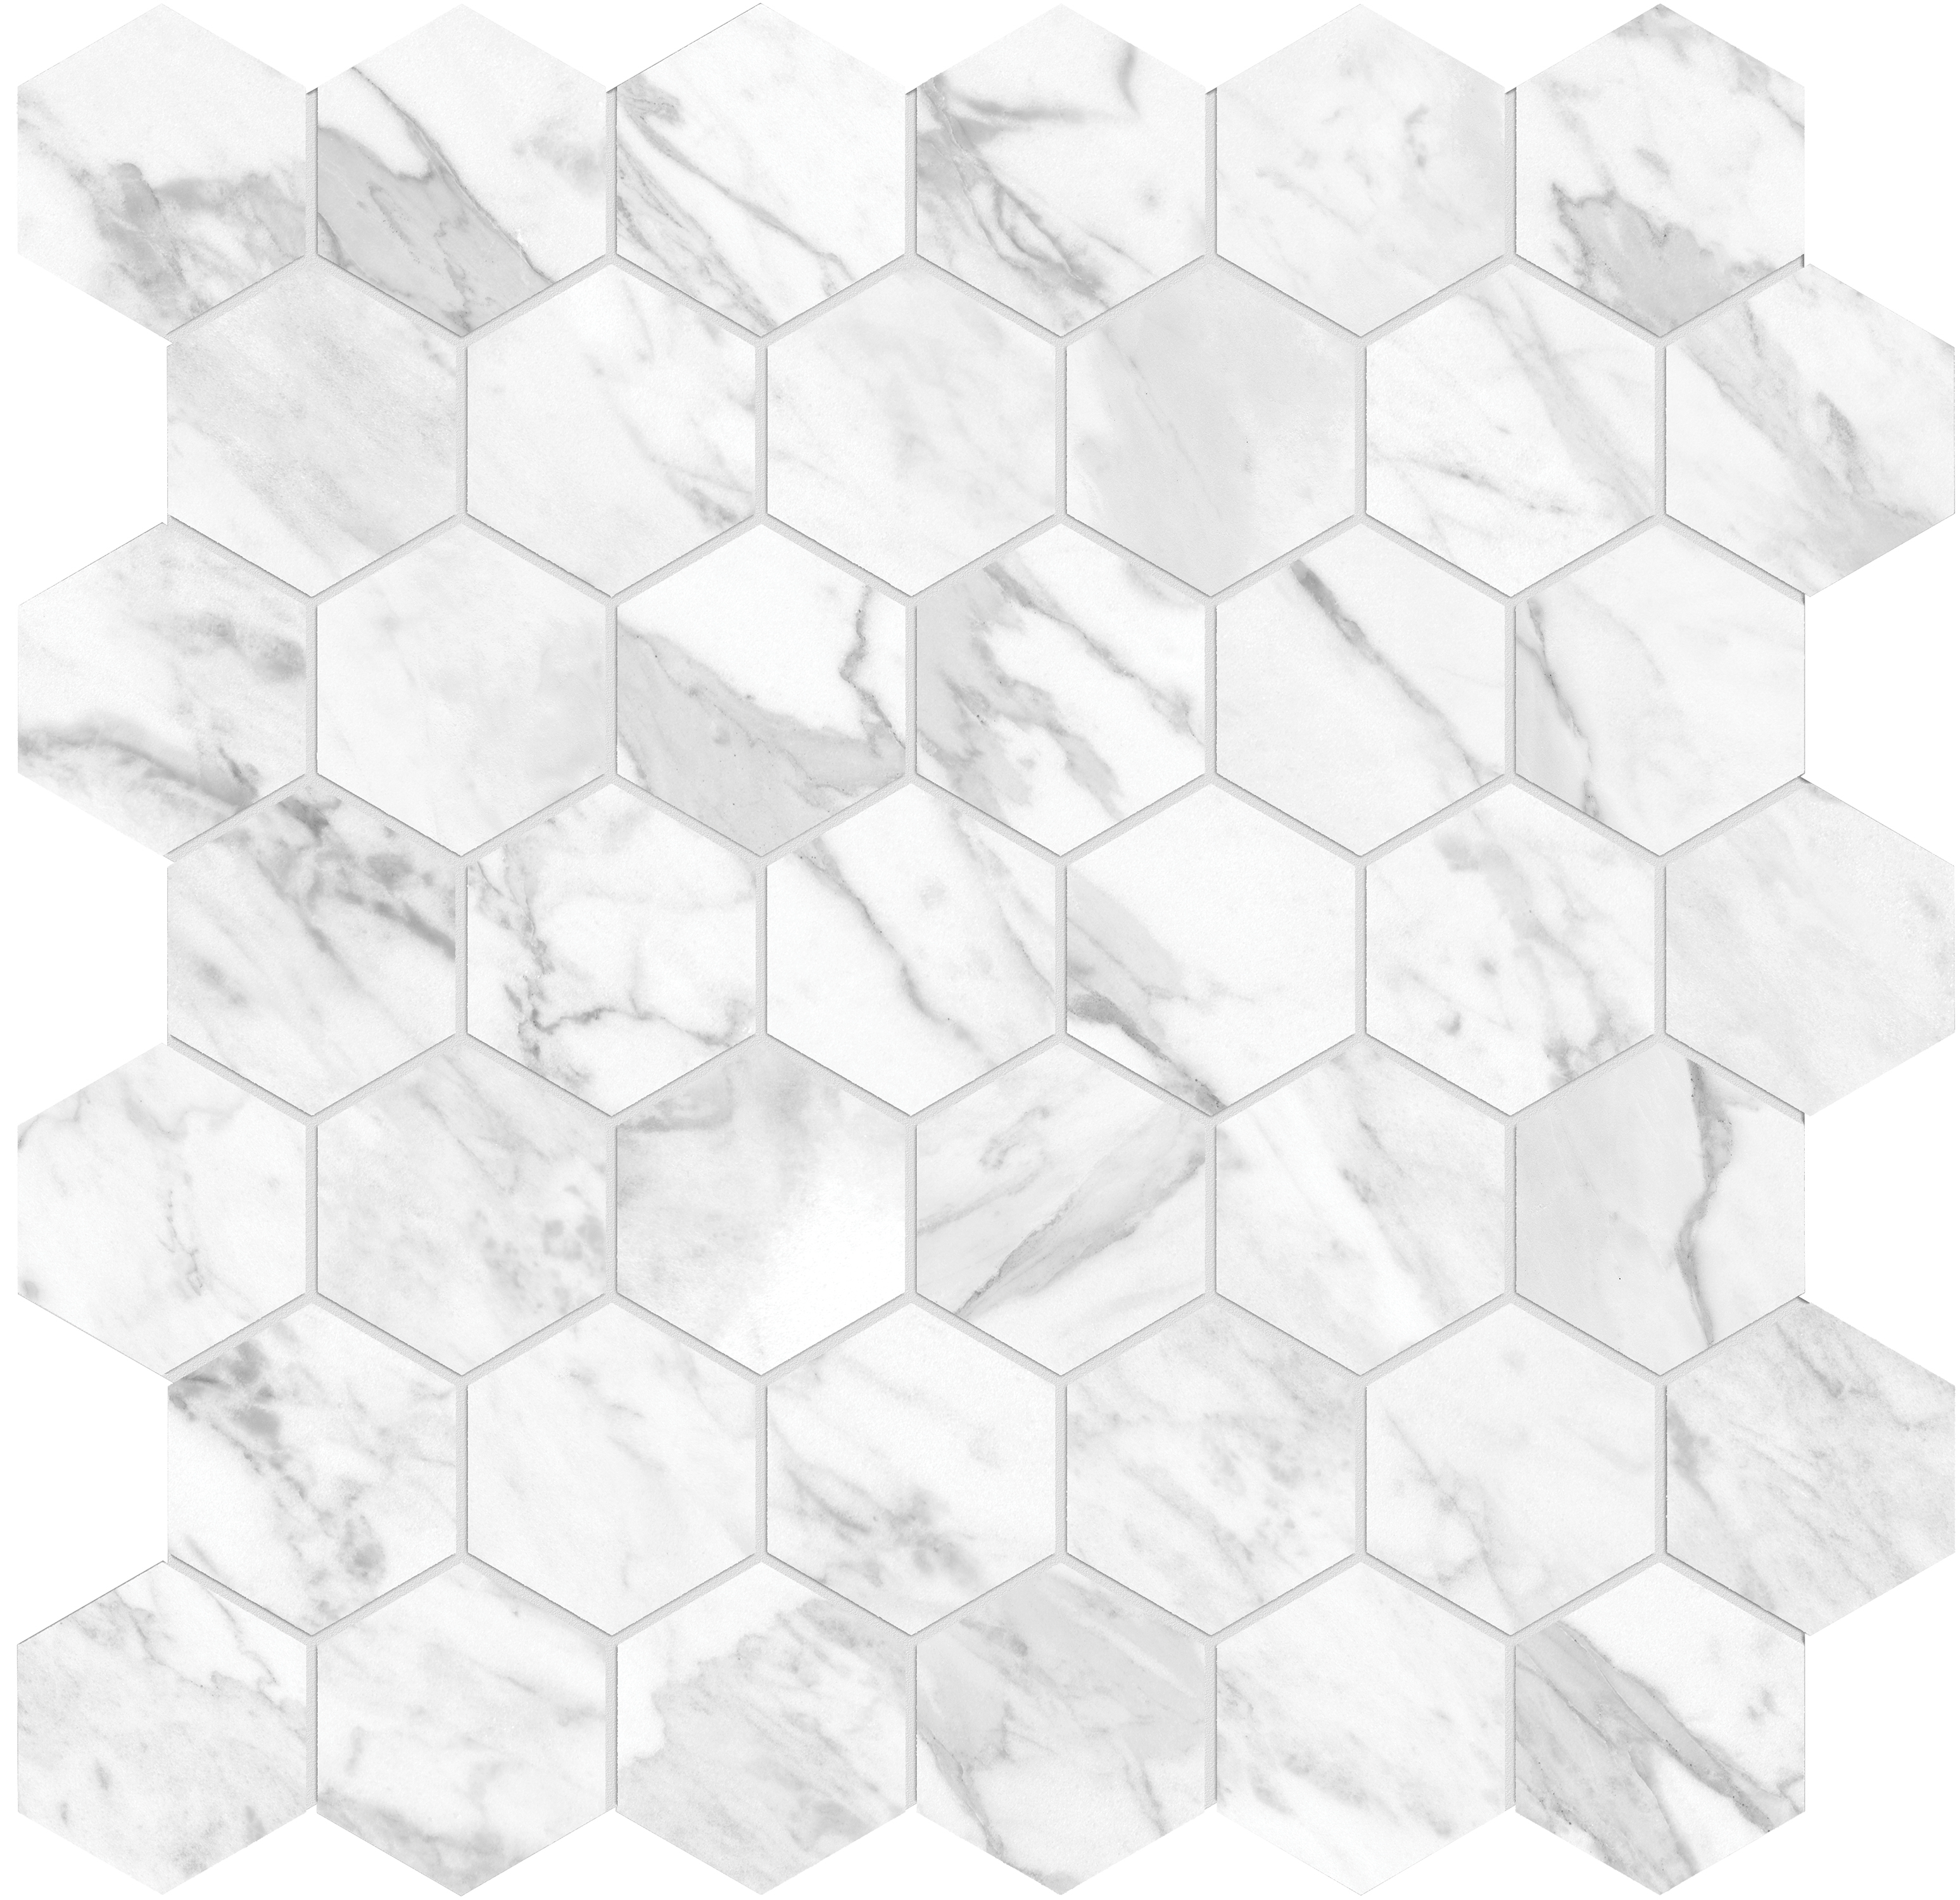 statuarietto hexagon 2-inch pattern glazed porcelain mosaic from la marca anatolia collection distributed by surface group international polished finish straight edge edge mesh shape